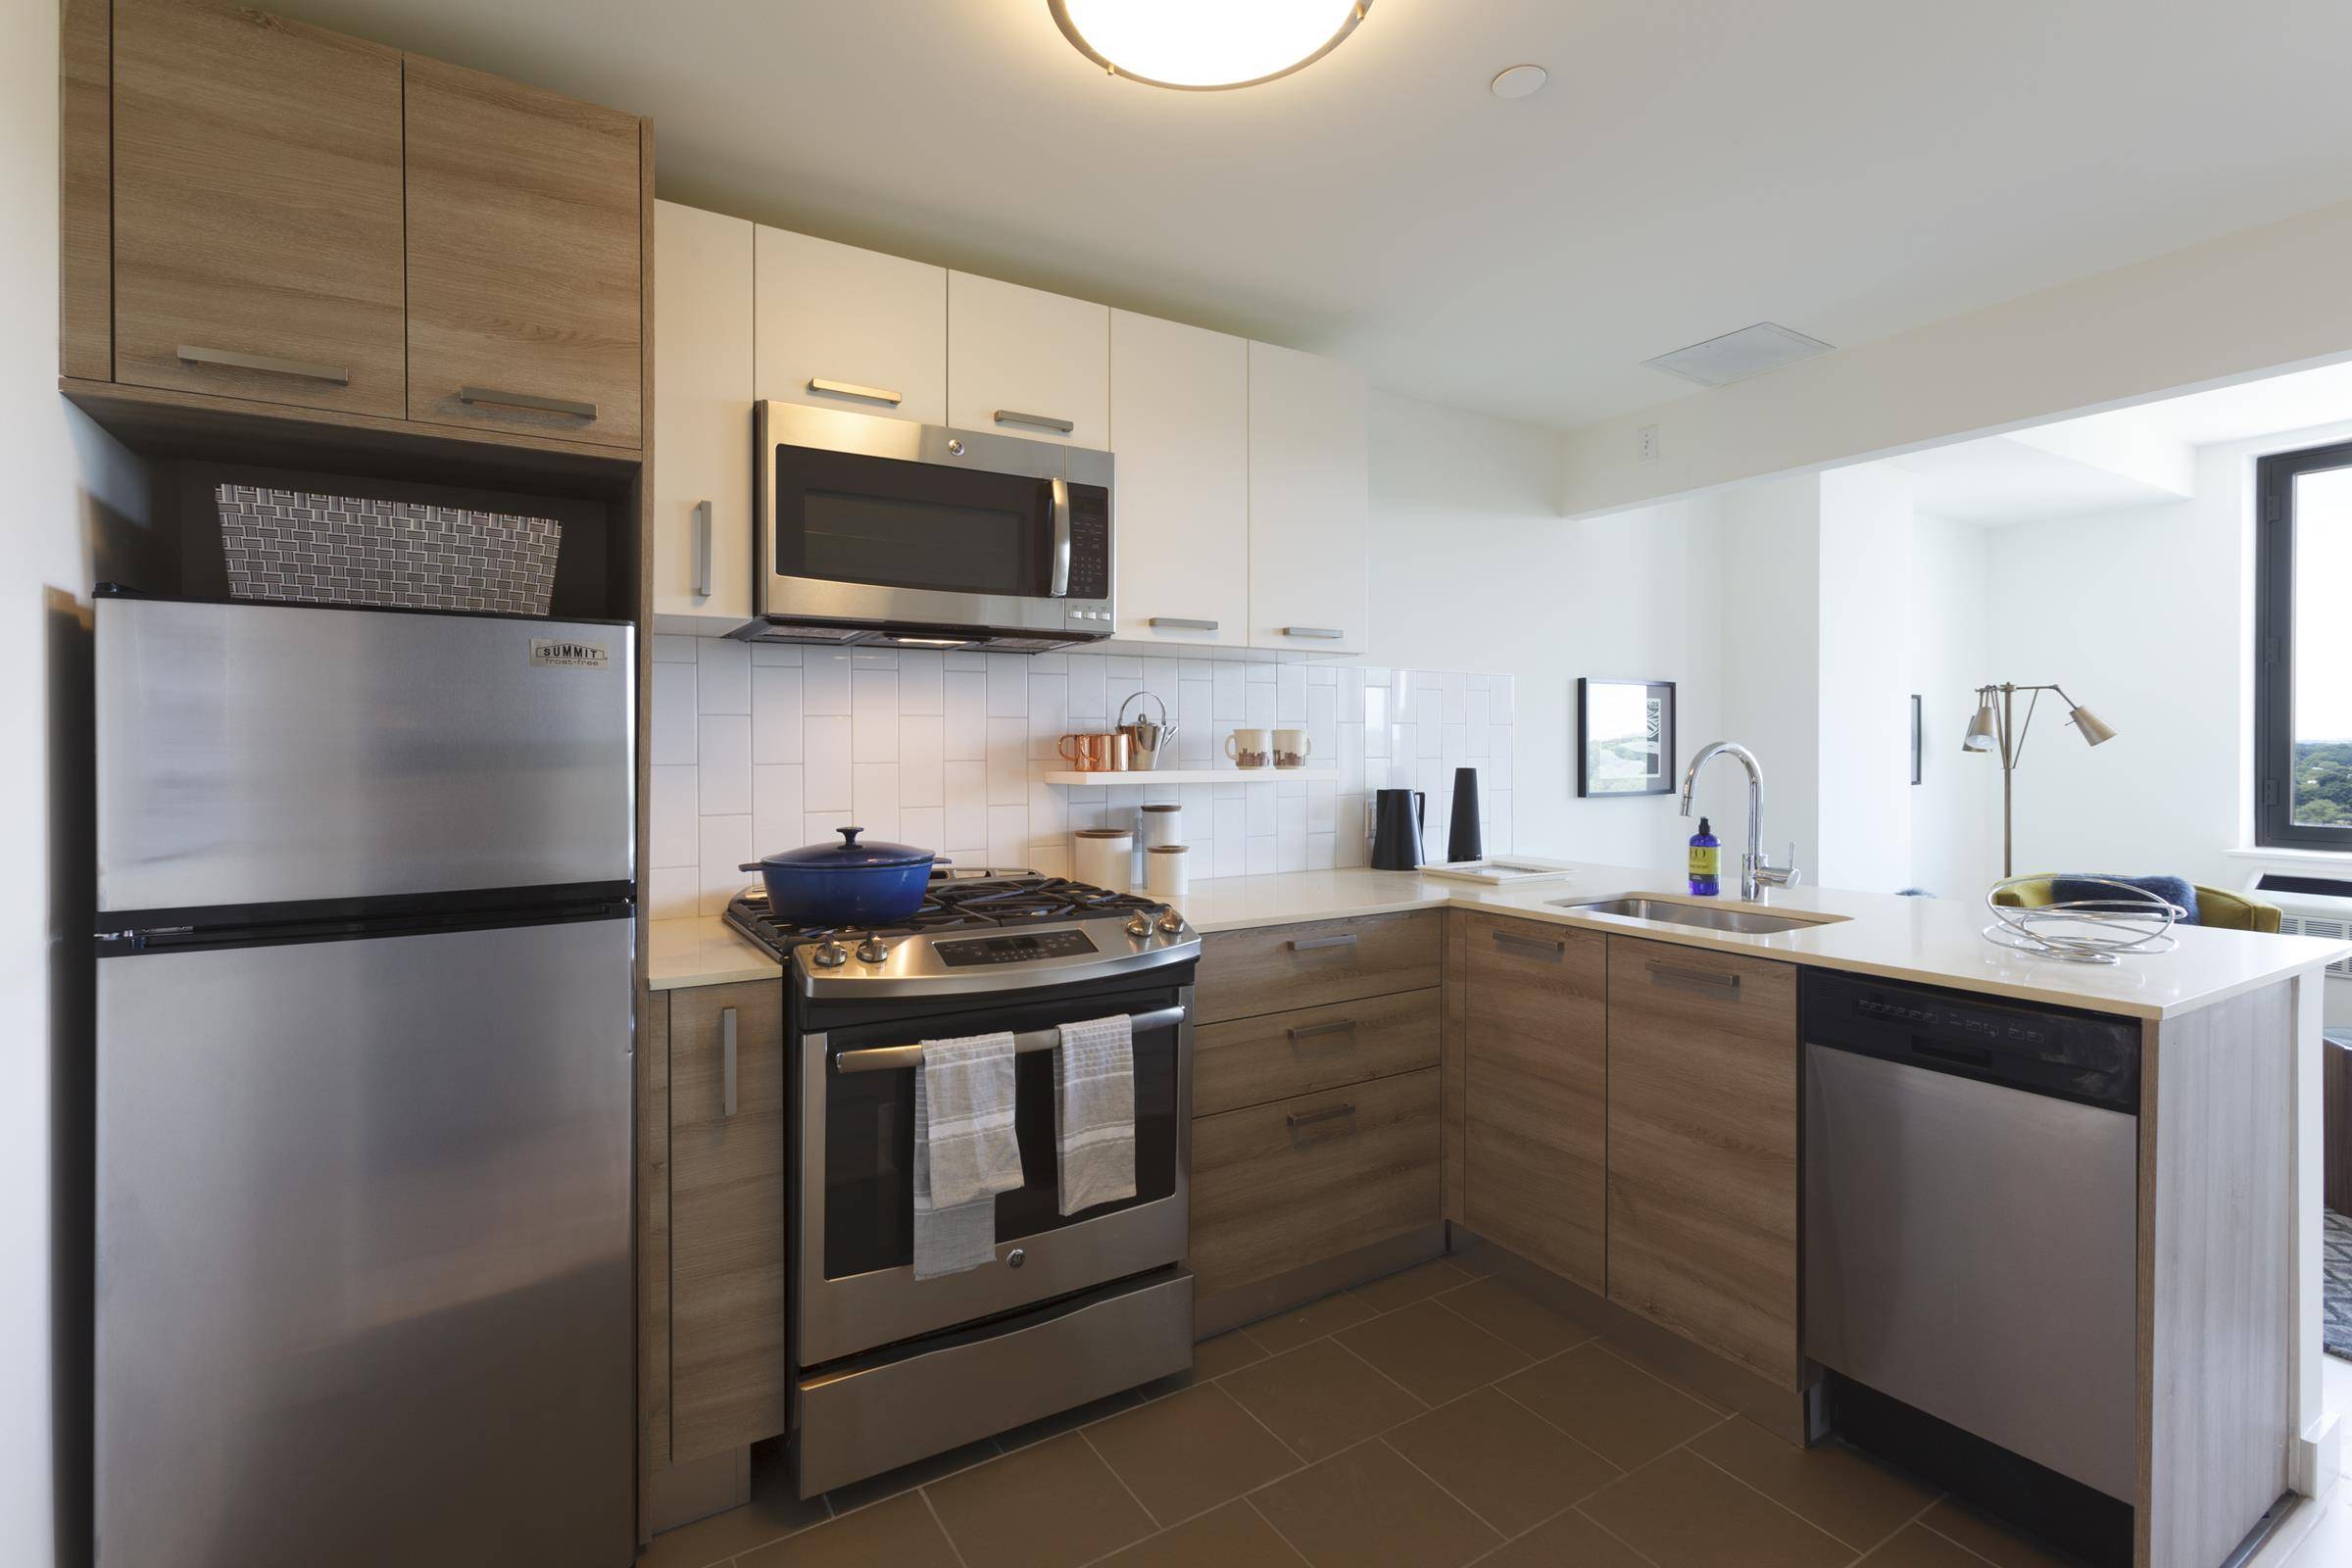 This bright, charming studio is located in The Parkline, a groundbreaking LEED certified new rental complex that unveils breathtaking views of Prospect Park, the Manhattan Skyline and the storied streetscapes ...